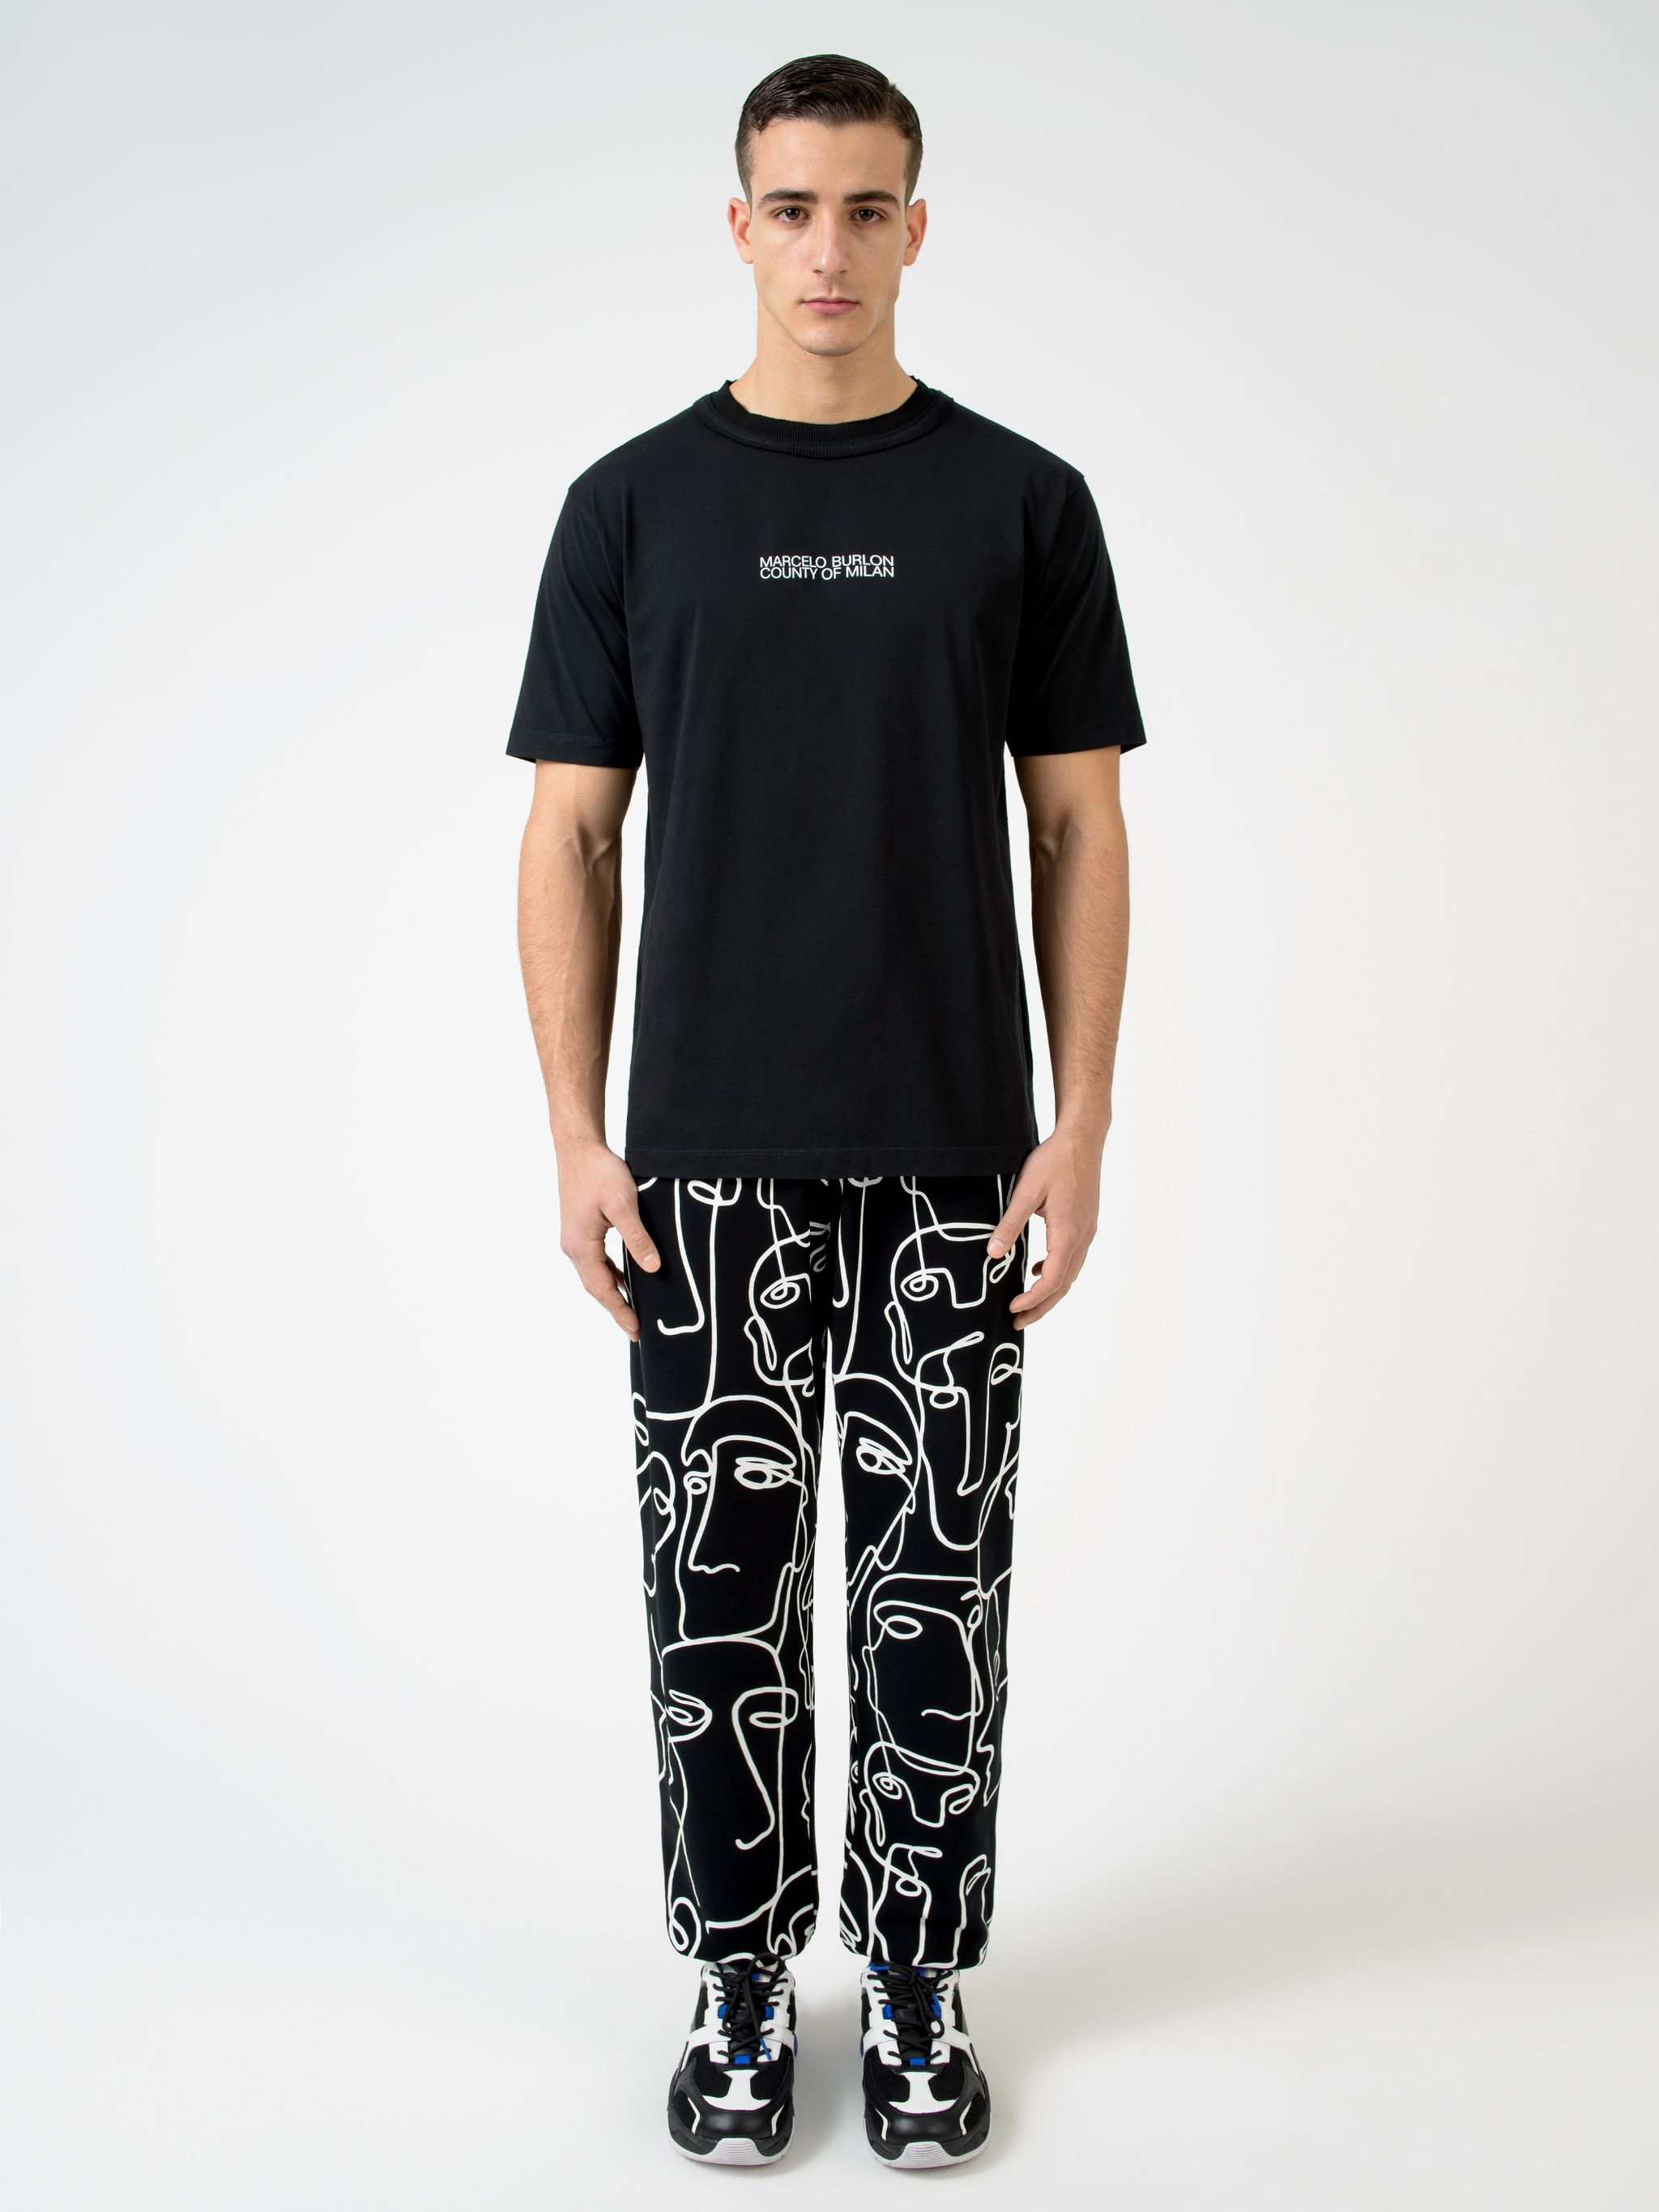 Black cotton Faces crew-neck T-shirt from Marcelo Burlon County of Milan featuring logo print to the front, graphic print to the rear, crew neck, short sleeves and straight hem.